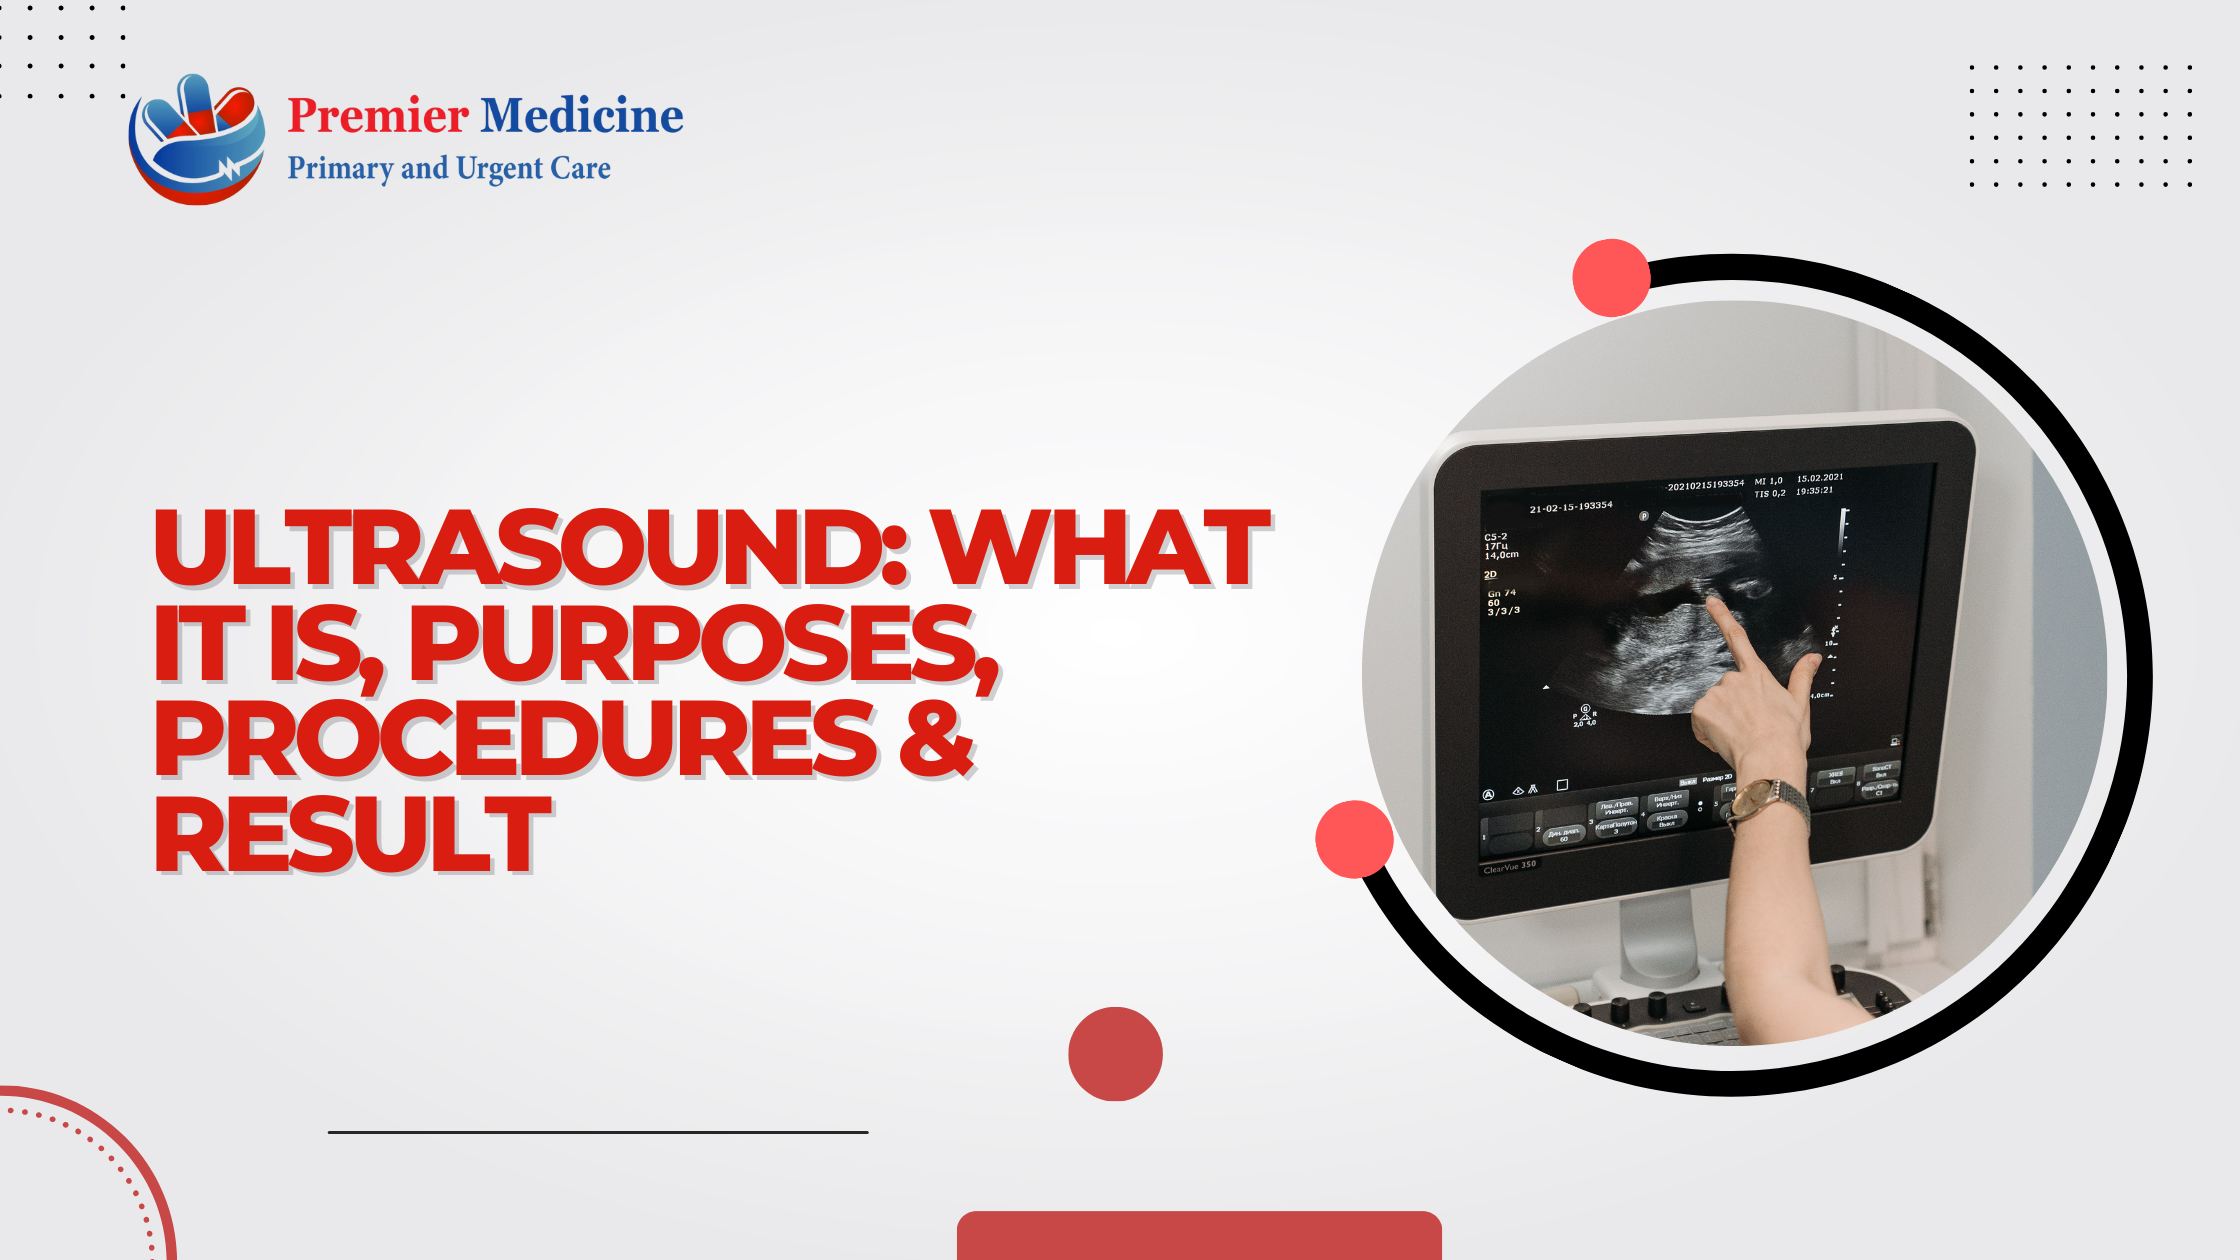 Ultrasound: What it is, purposes, procedures & result.